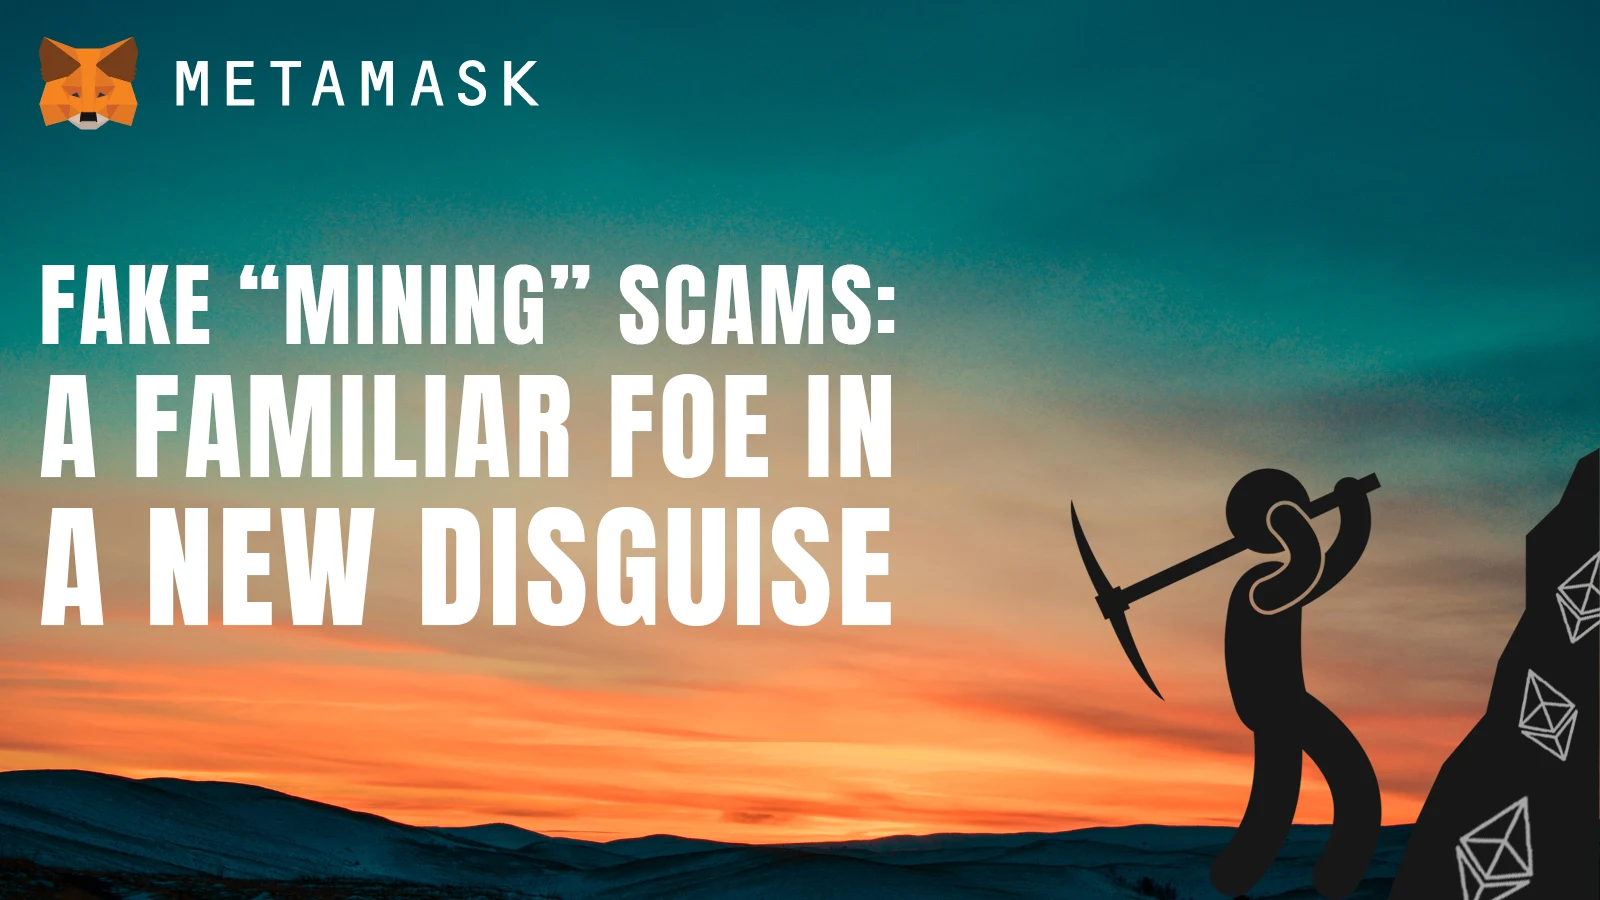 Image: Fake “Mining” Scams: a Familiar Foe in a New Disguise